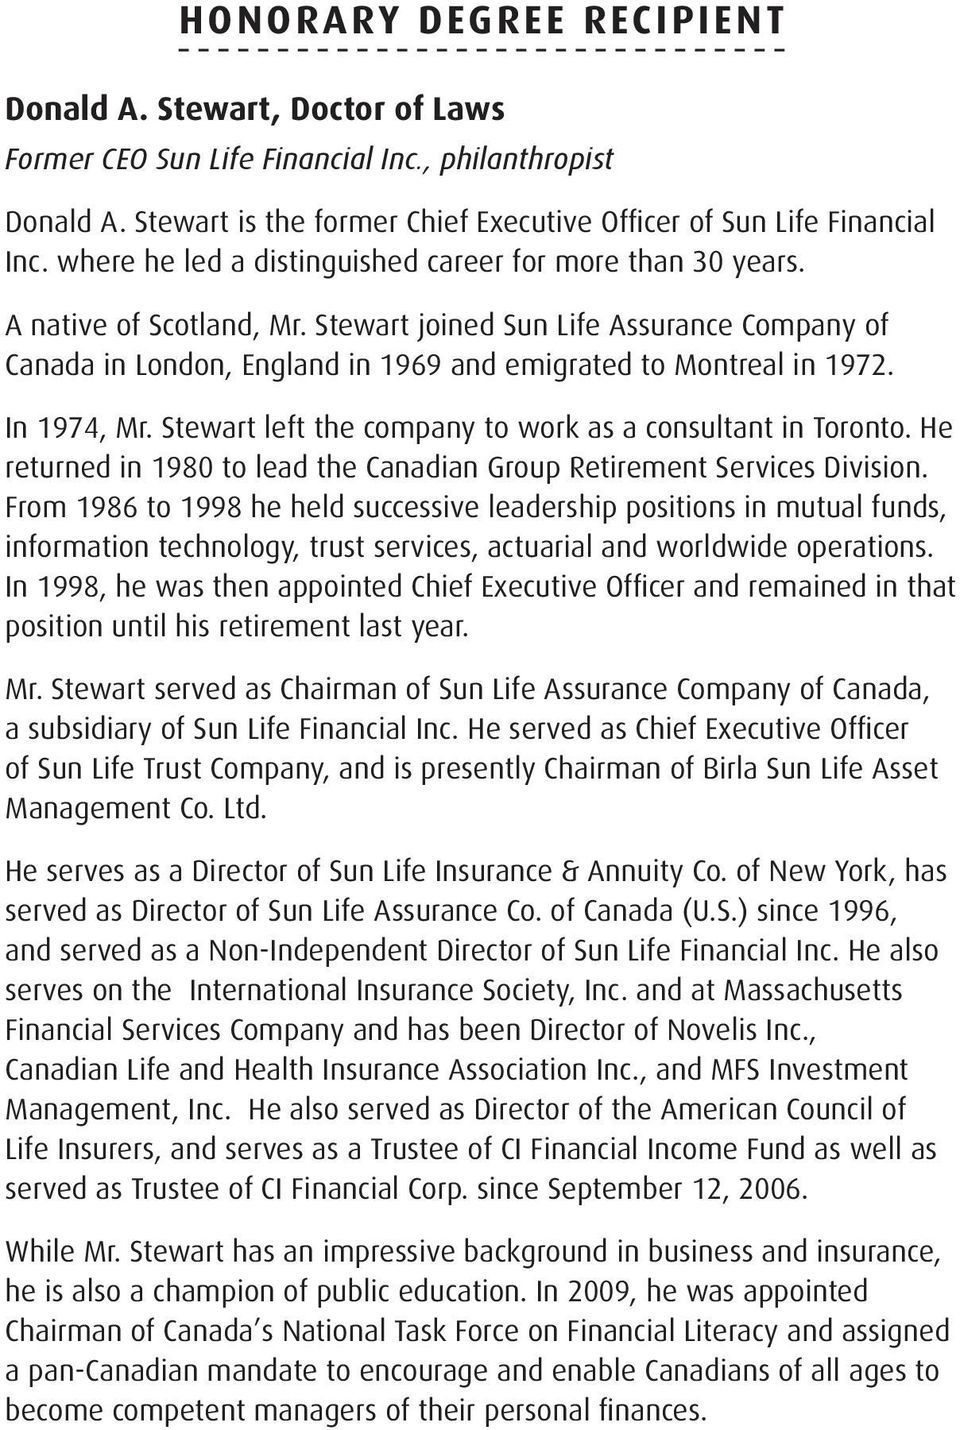 In 1974, Mr. Stewart left the company to work as a consultant in Toronto. He returned in 1980 to lead the Canadian Group Retirement Services Division.